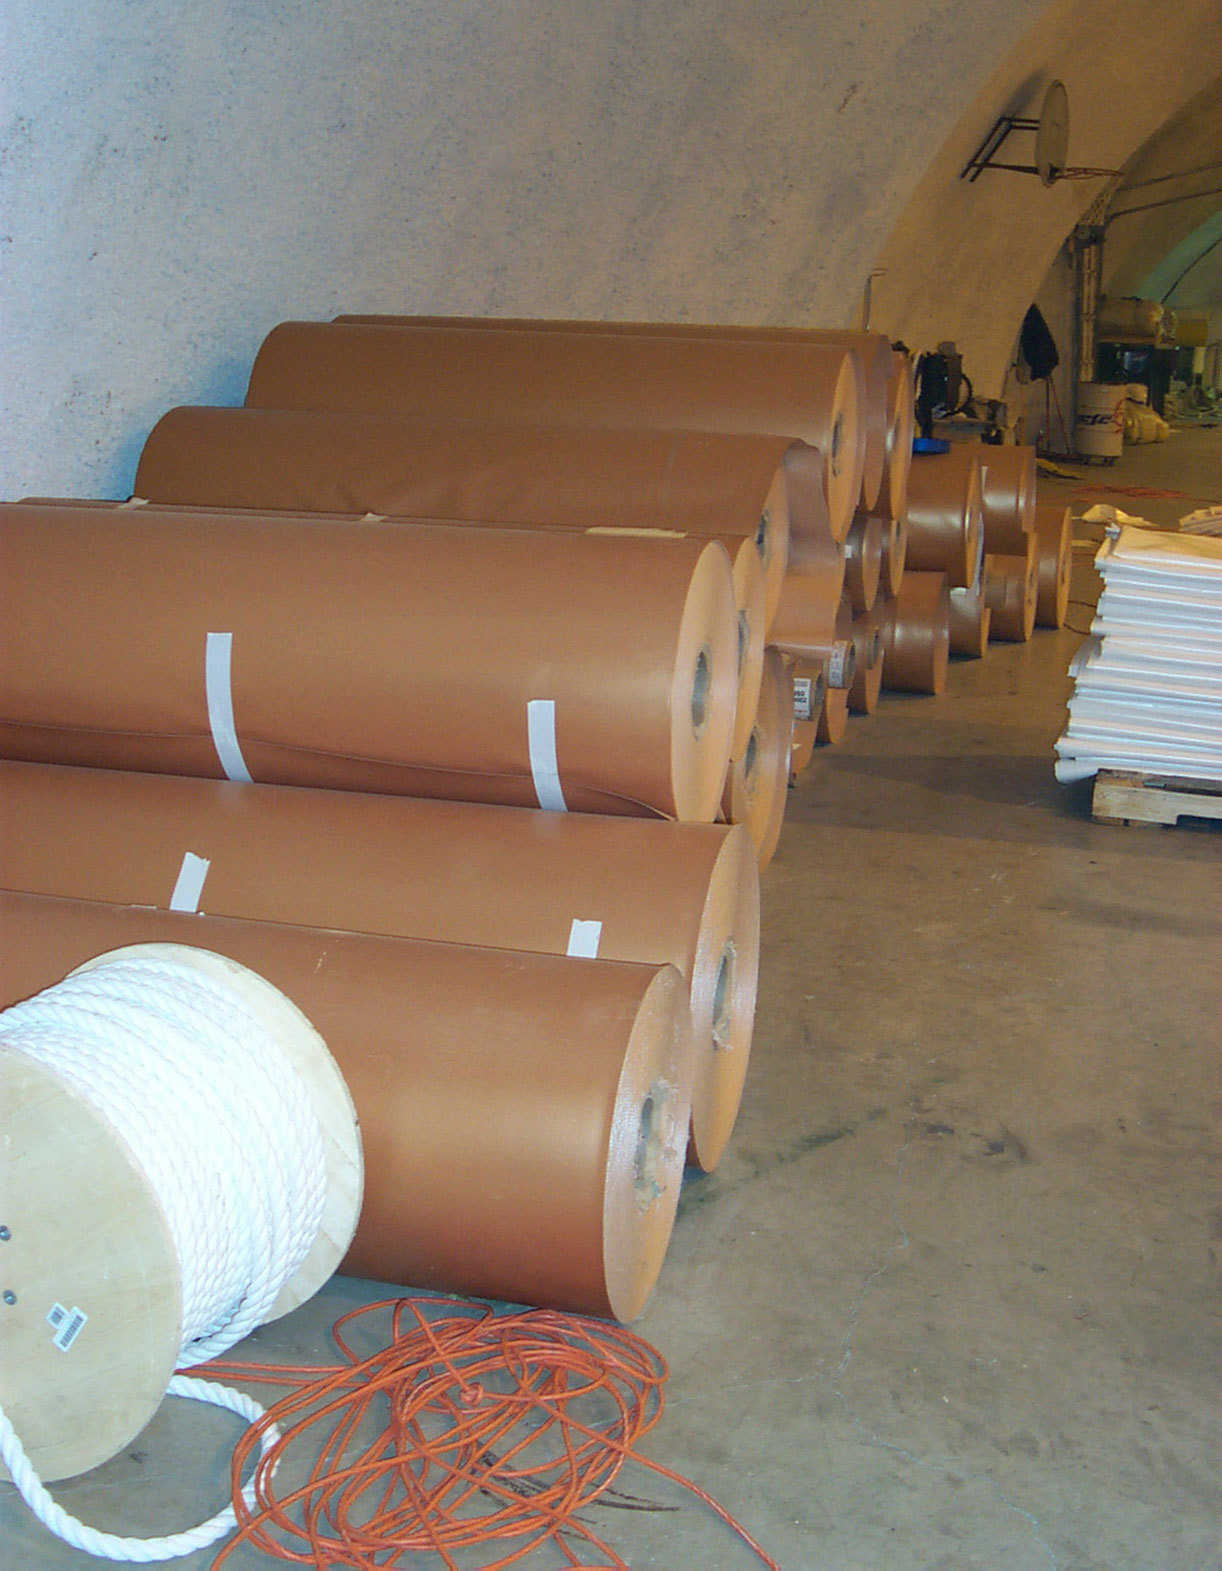 Airform fabrics — Monolithic has special fabrics shipped to Bruco from all over the world. Bruco safely stores massive rolls.